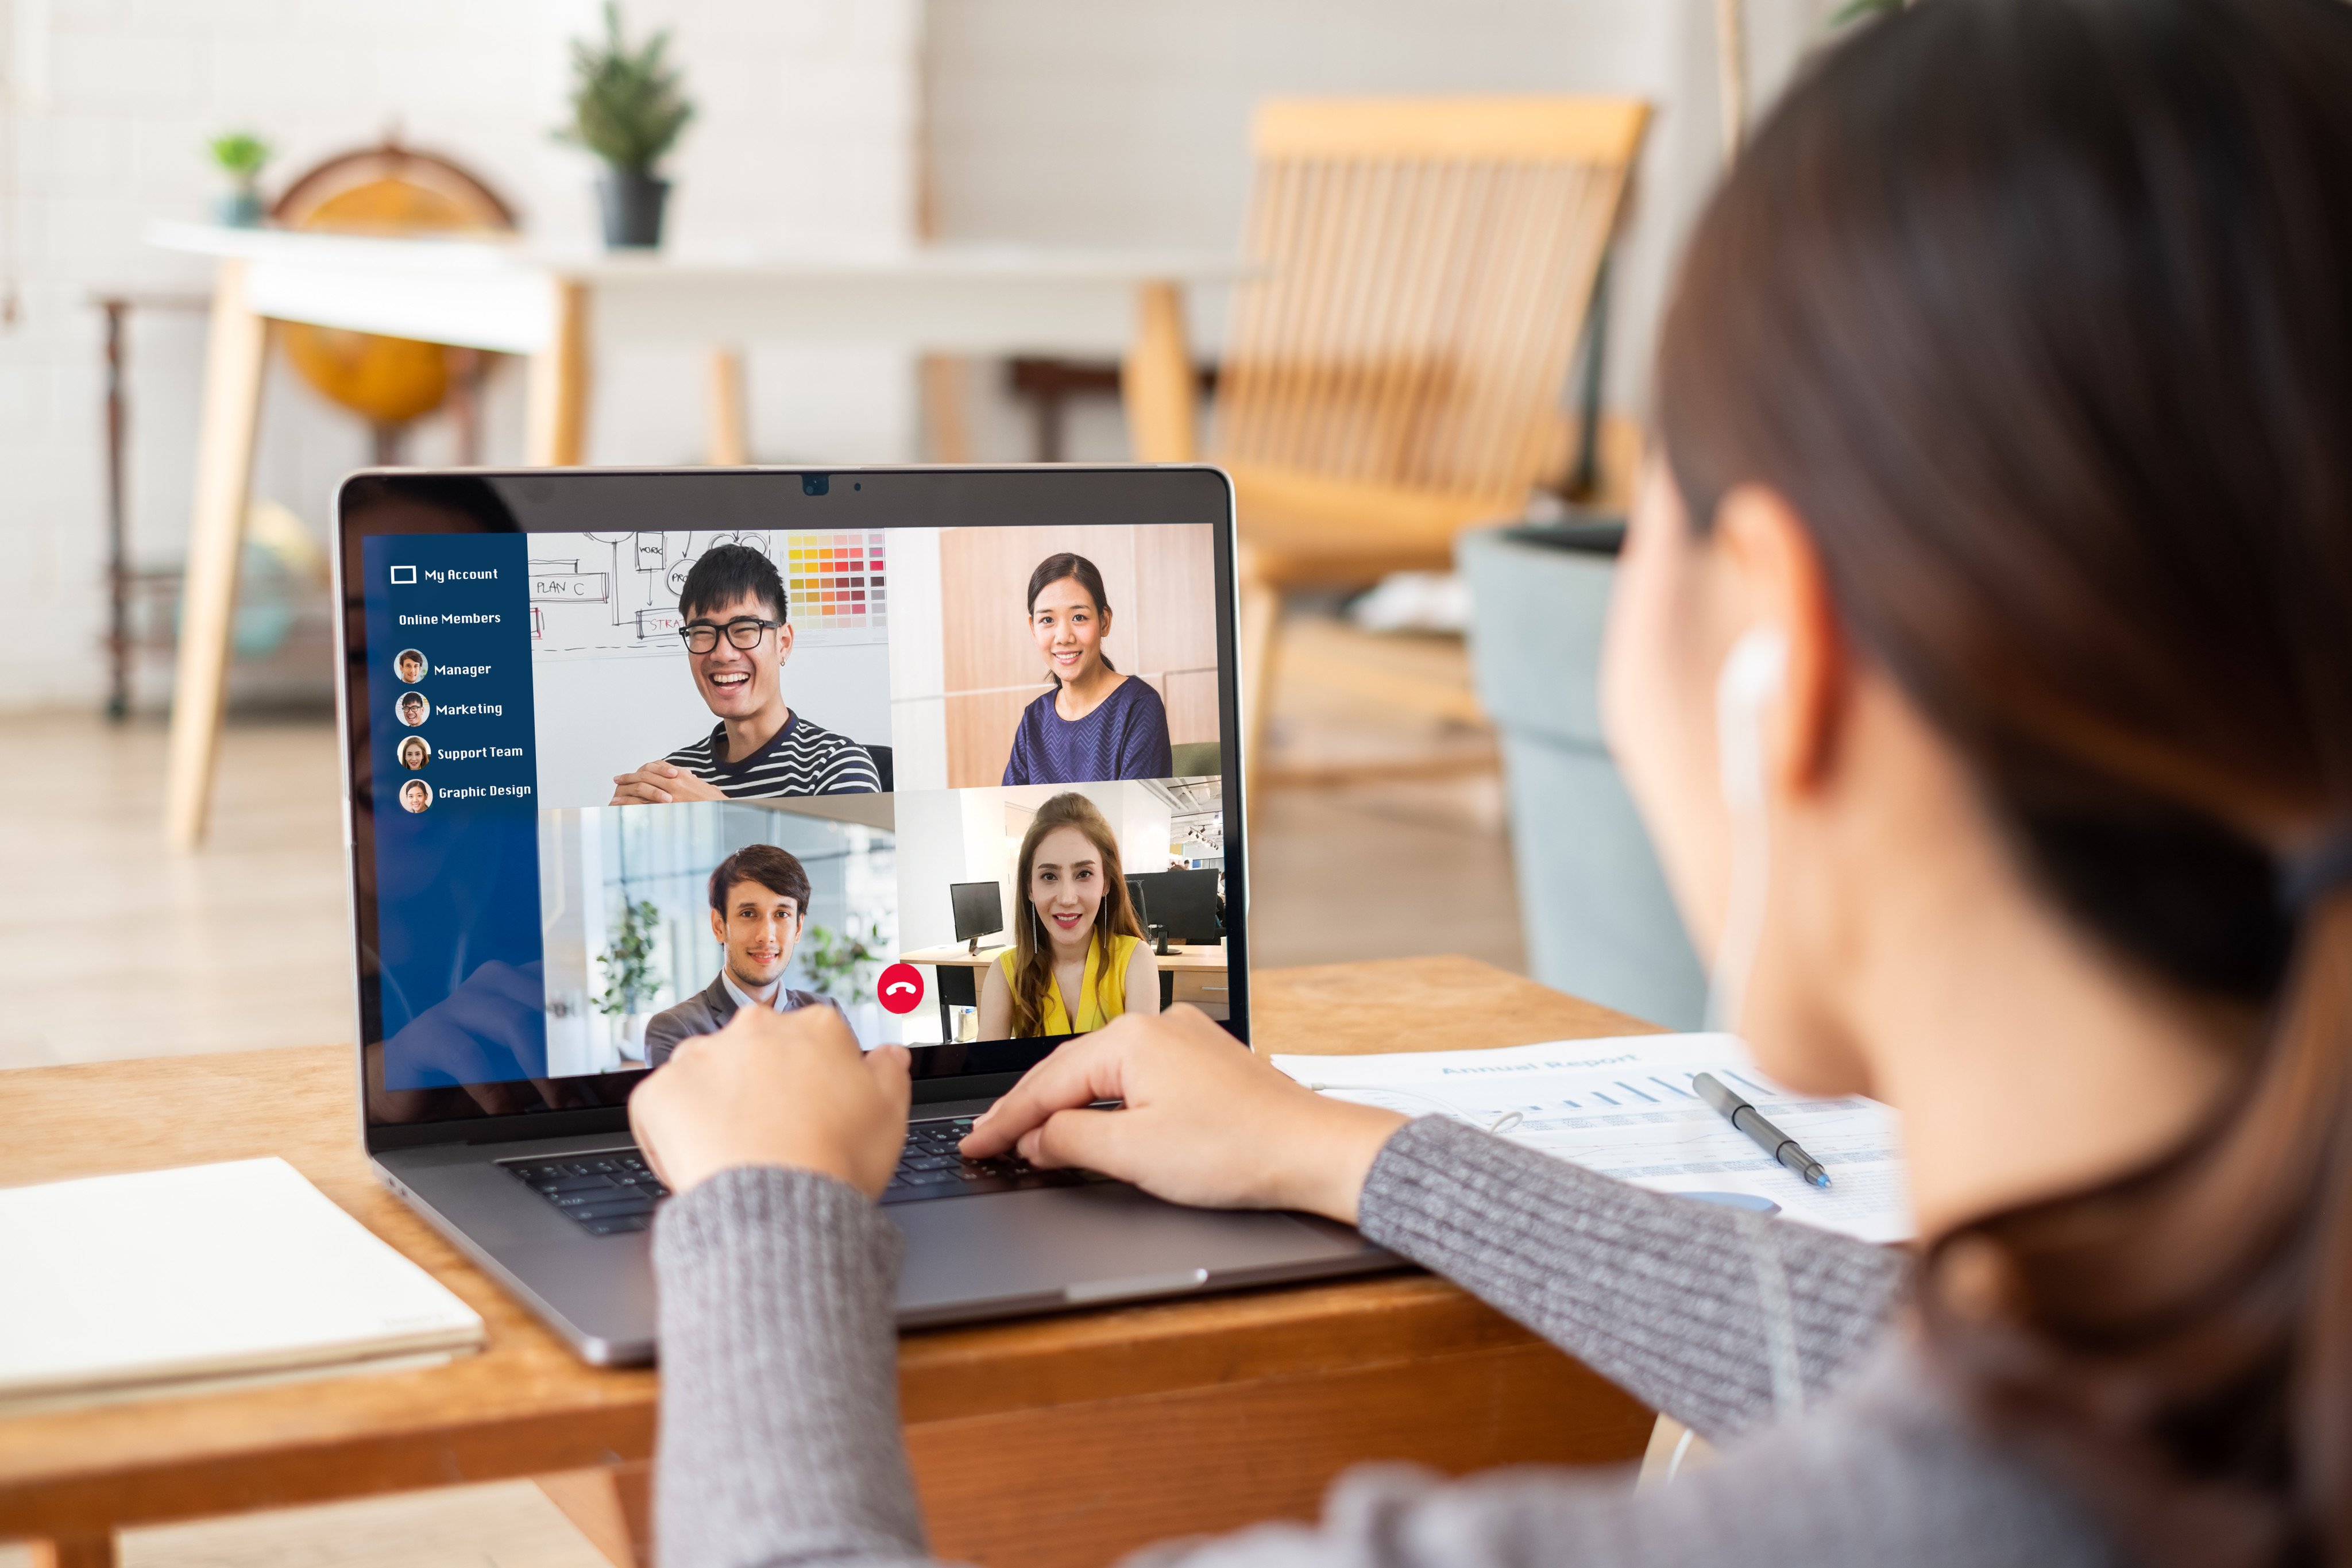 Nine out of 10 employees in Hong Kong prefer to work remotely, according to a survey by accounting giant PwC. Photo: Shutterstock